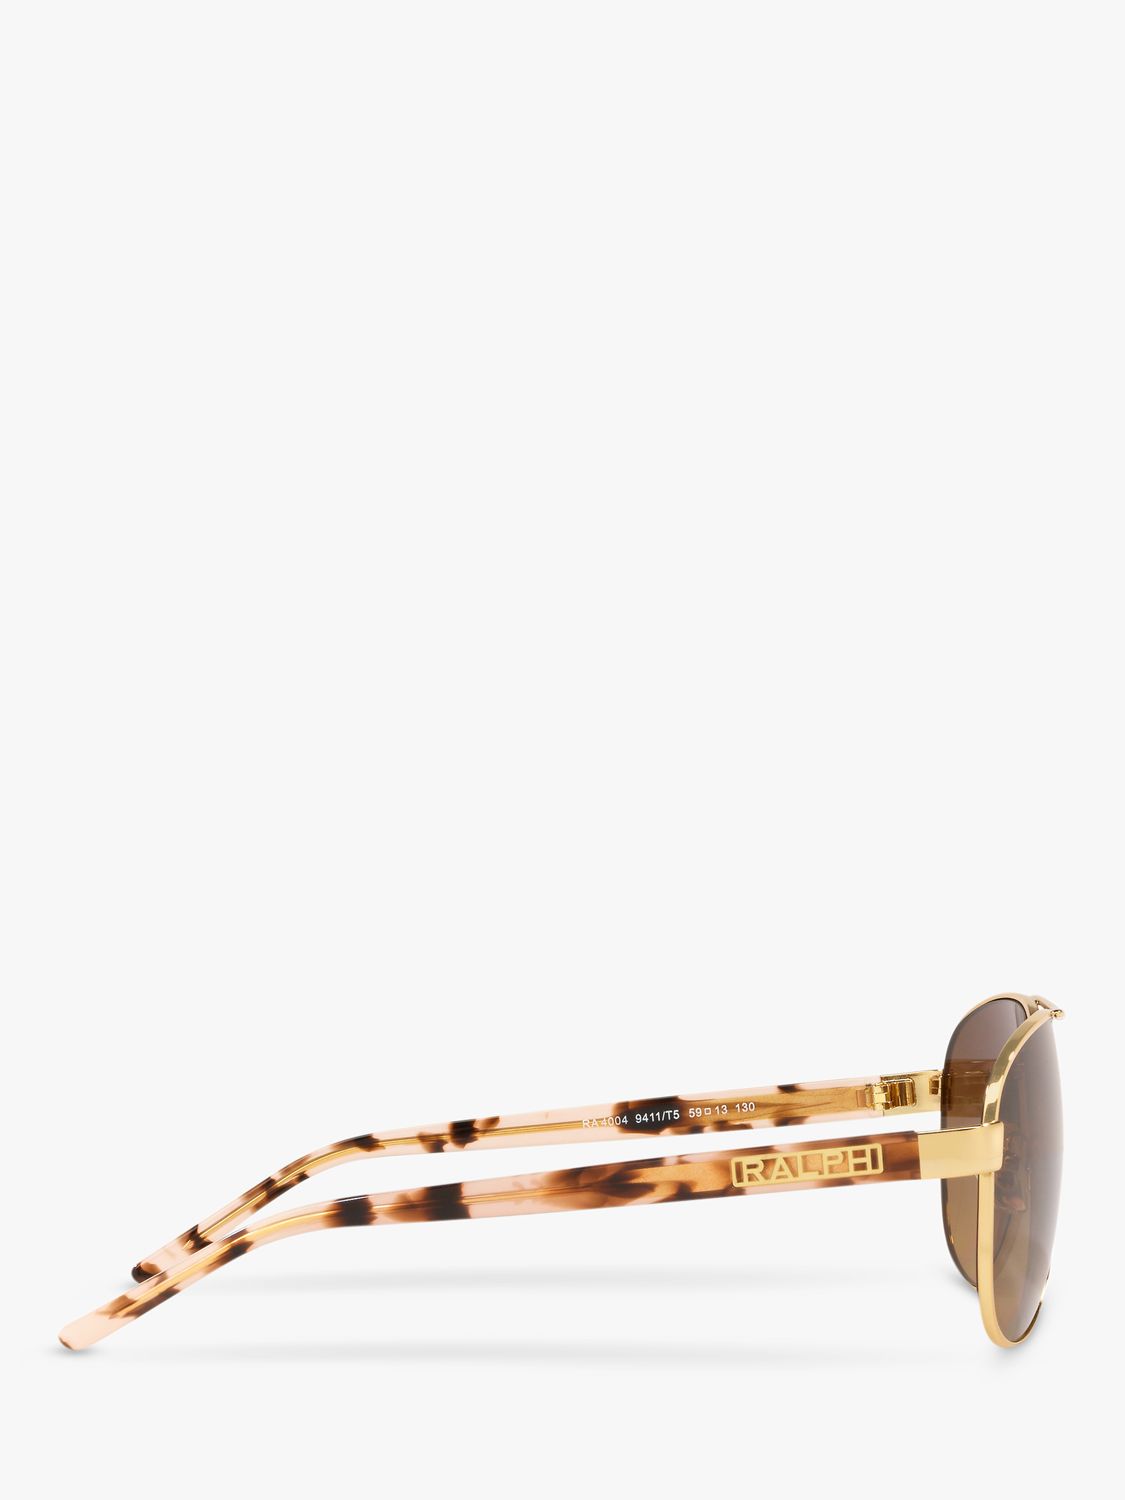 Louis Vuitton The Party Sunglasses In Mng Marron